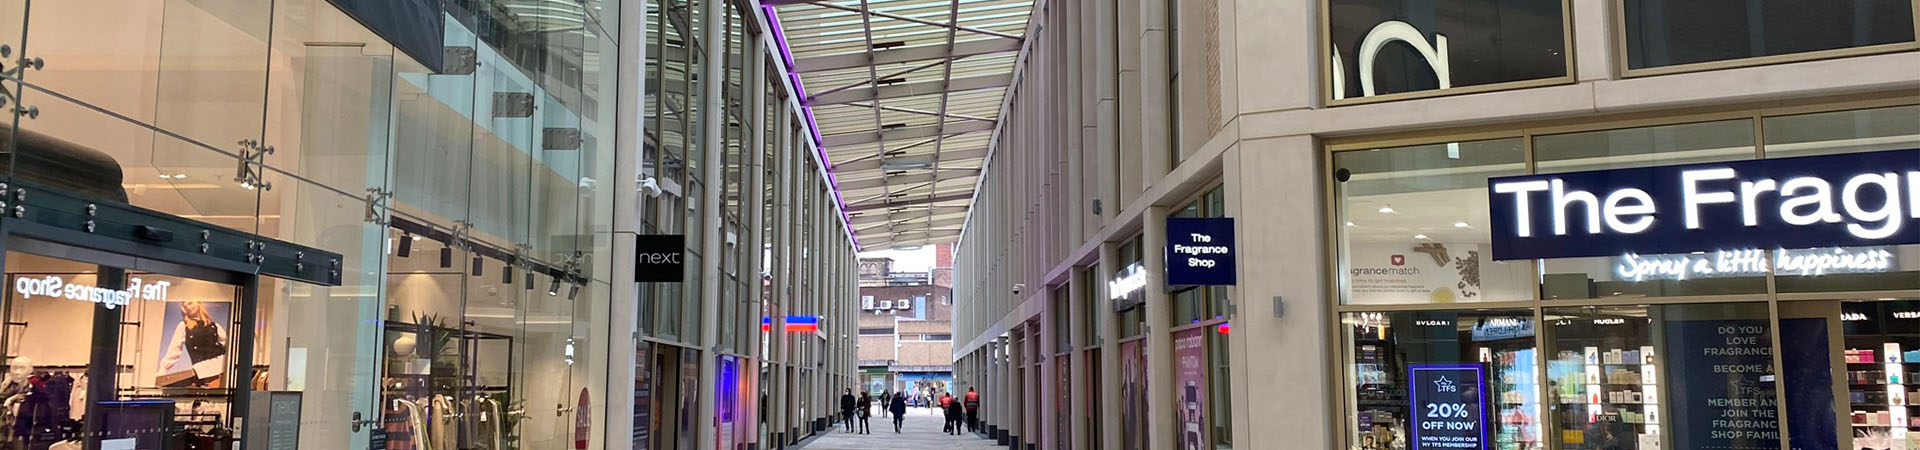 Shopping centre with structural steel canopy